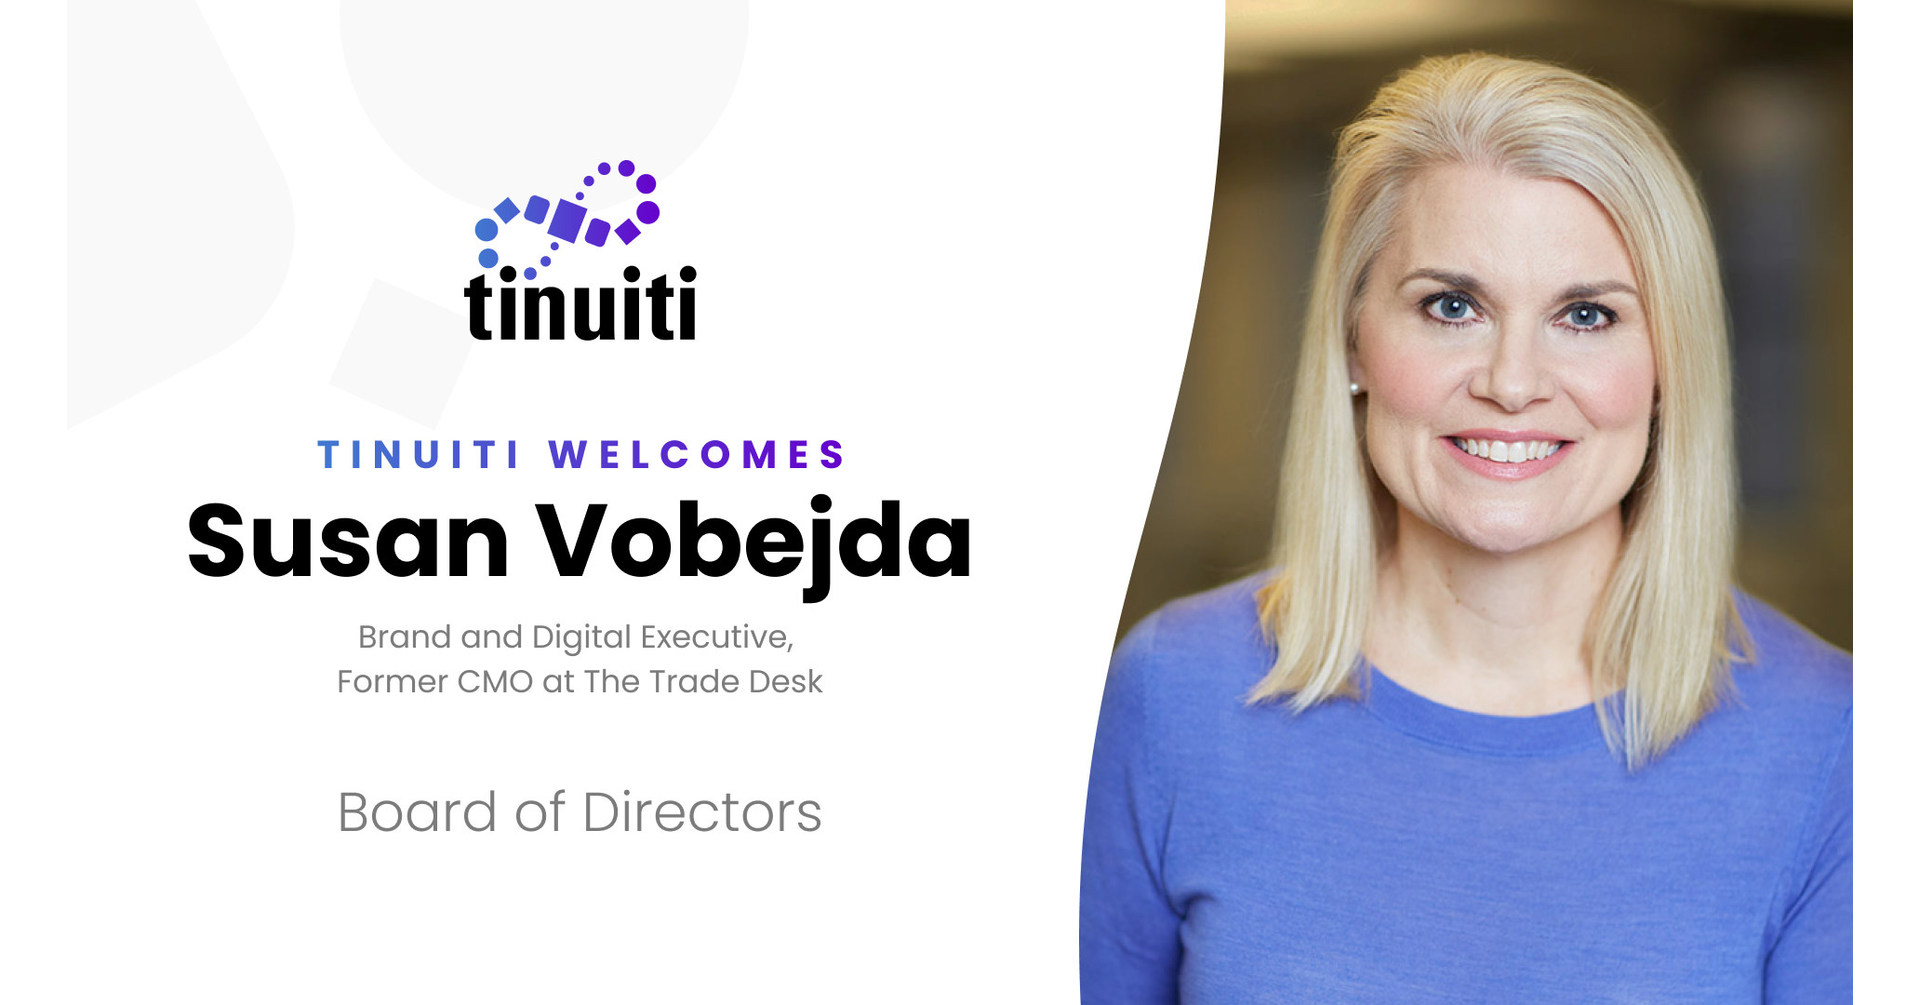 Tinuiti's Board of Directors Injects Marketing and Business Growth  Expertise with Industry Veteran Susan Vobejda as Newest Board Member